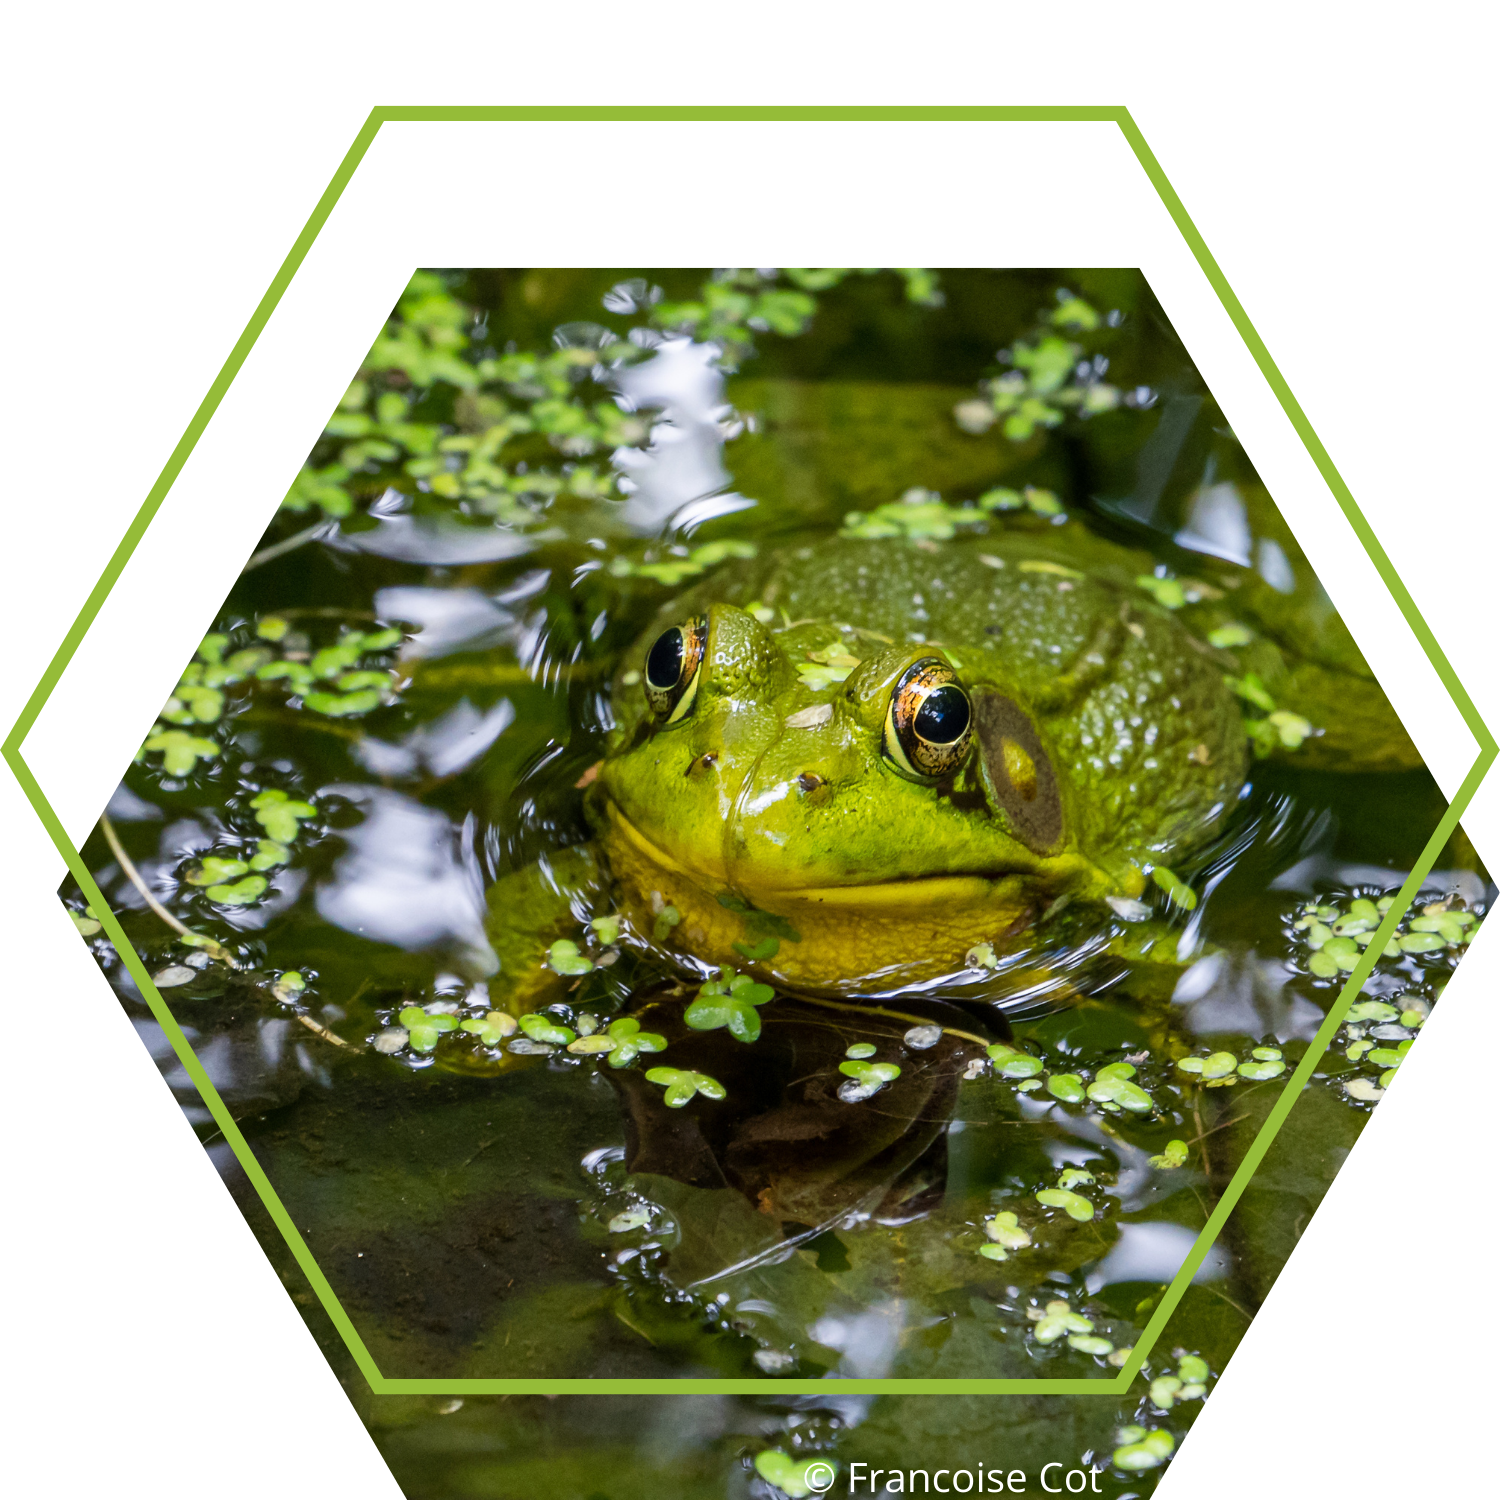 Image Grenouille F. Cot